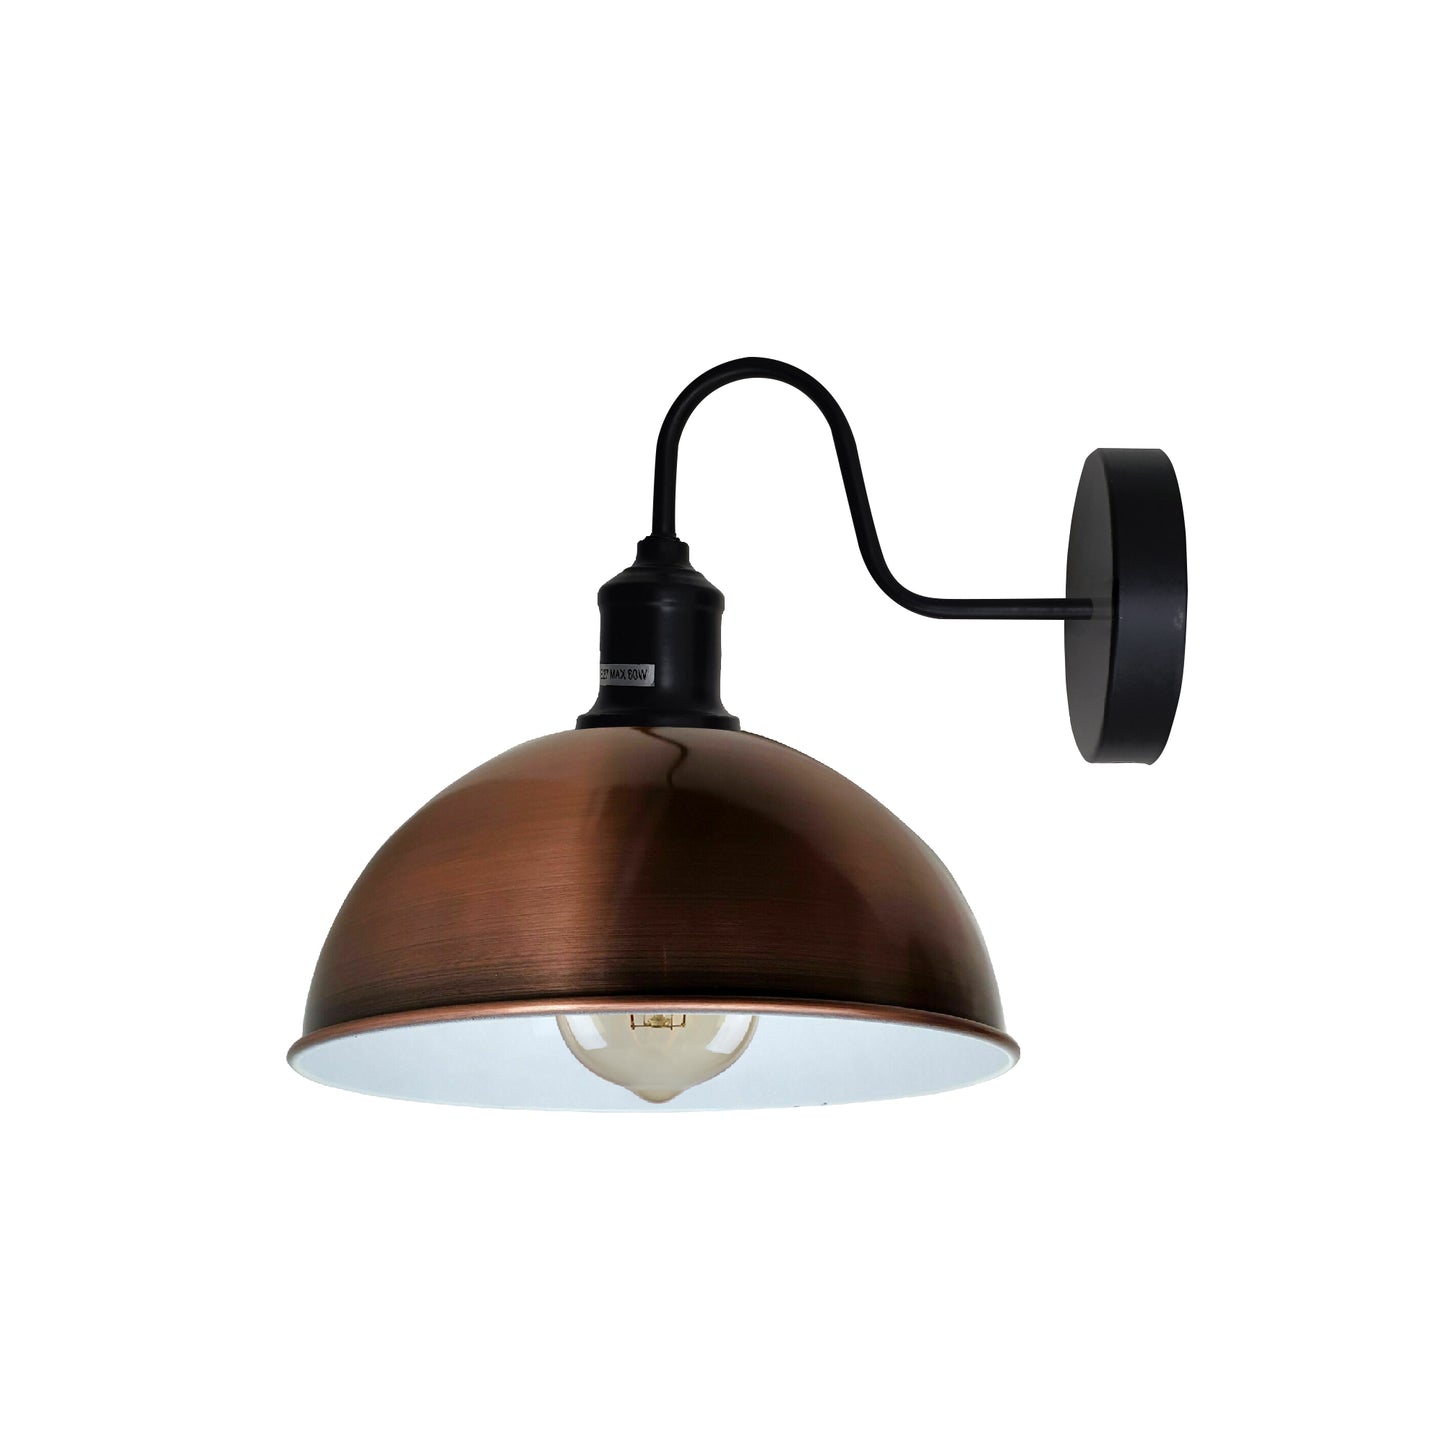 Brushed copper wall sconce lamp